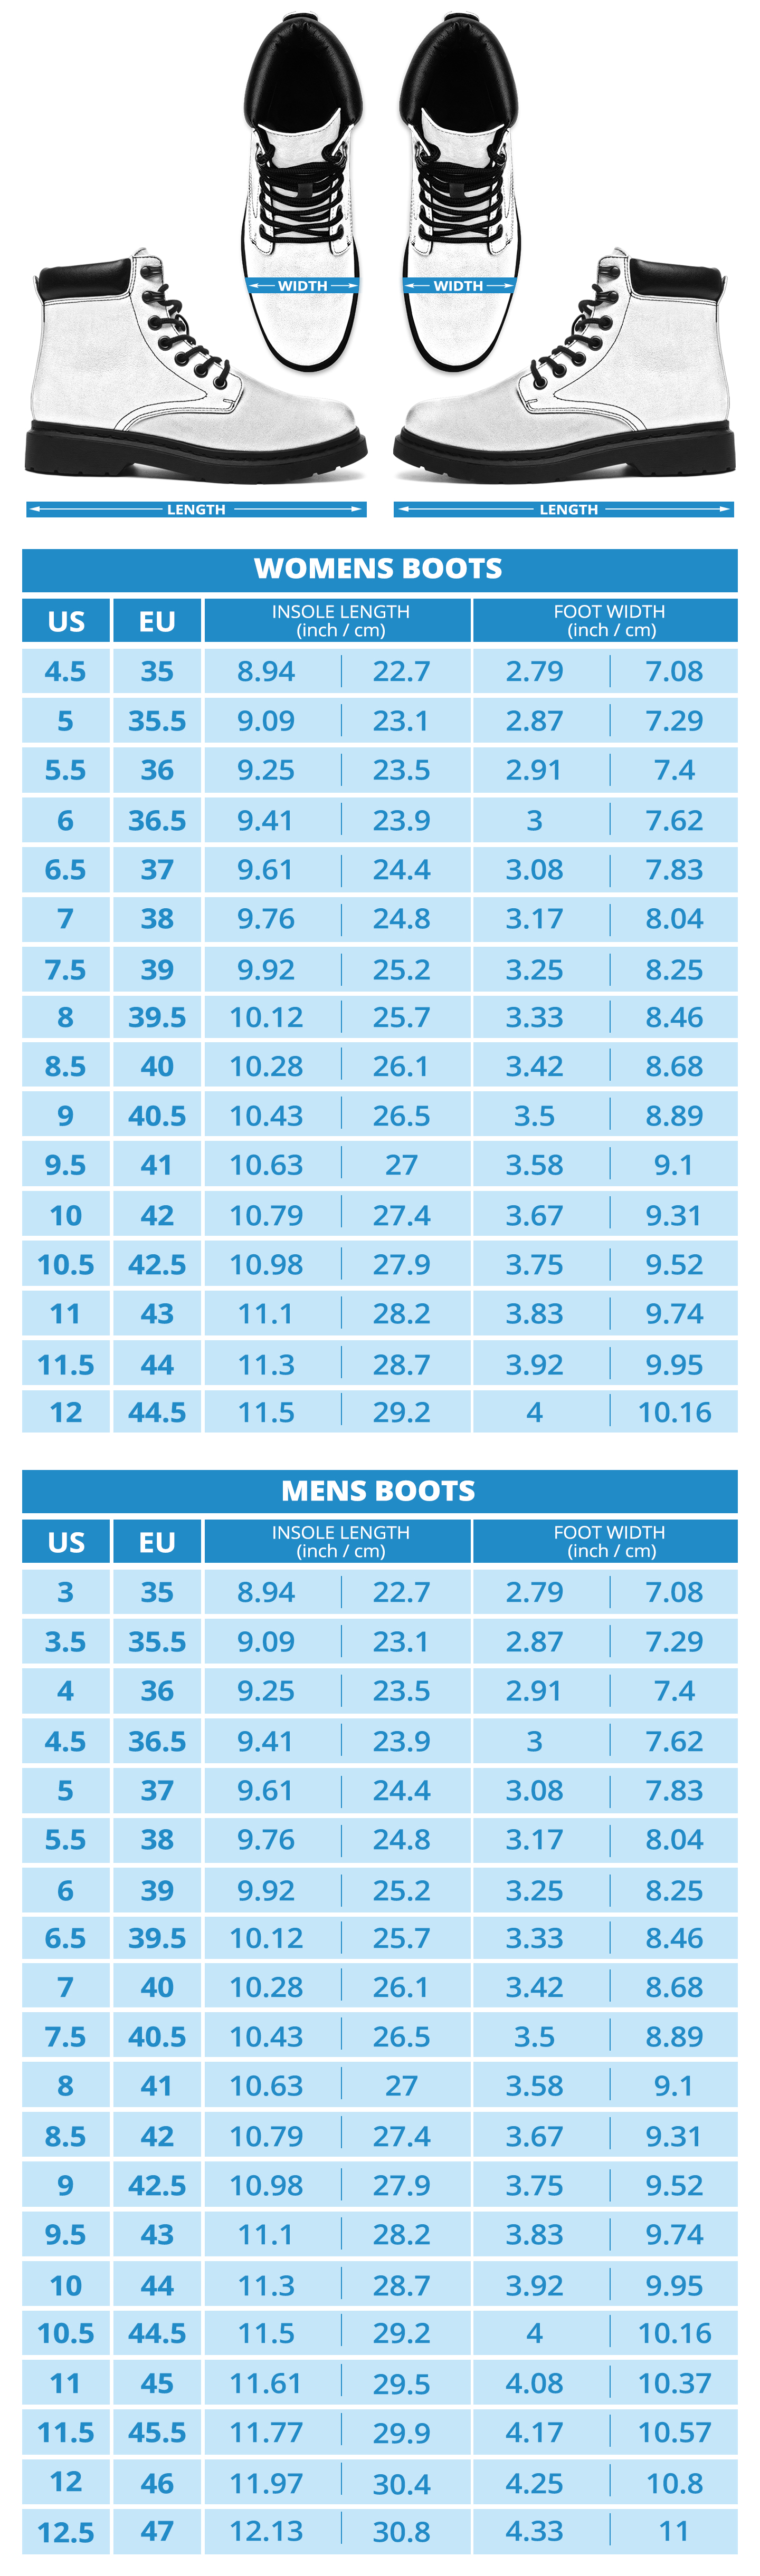 Boots August 2019 Sizing Chart NEW - The Cow Print